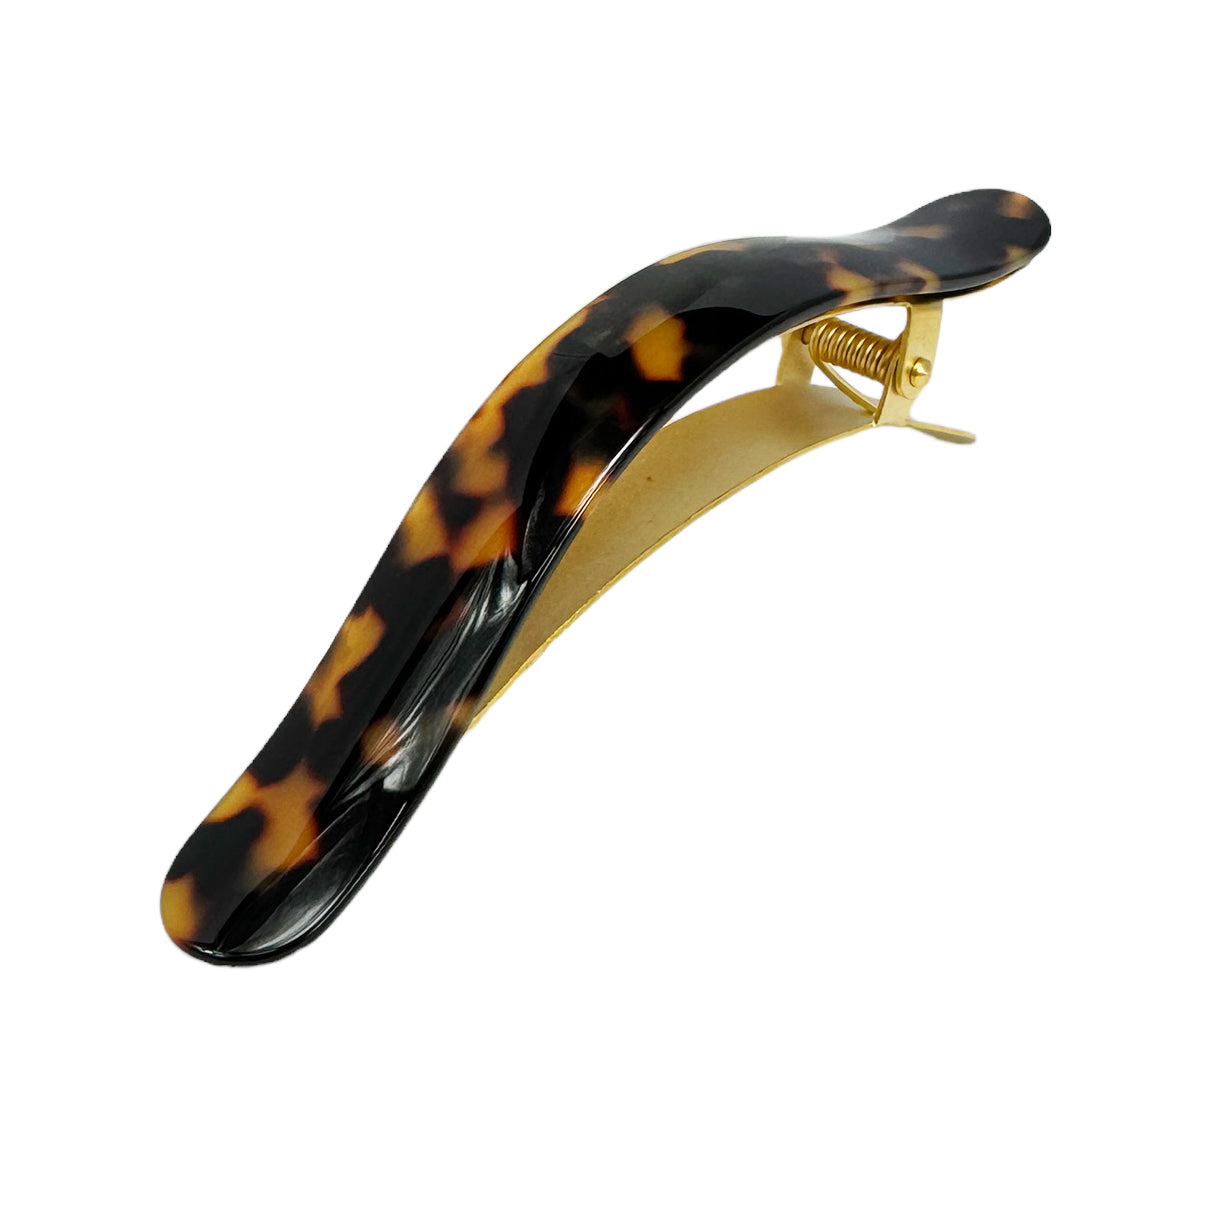 Ficcare Ficcarissimo Hair Clip in Yellow Tokyo Acetate